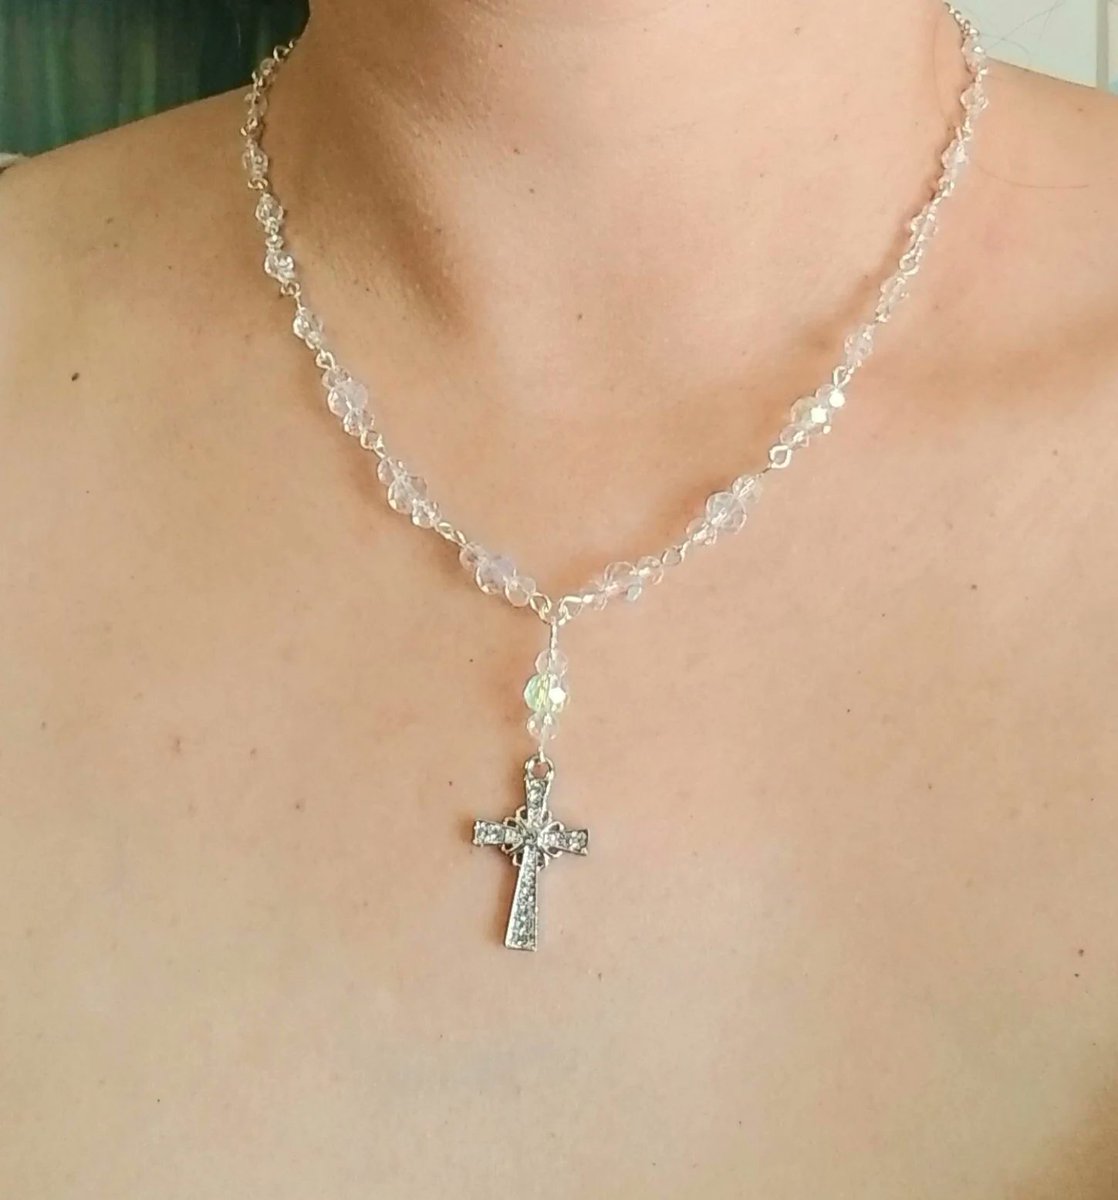 Crystal Cross Necklace, Crystal Cross Pendant, Rosary Necklace  #cross #crossnecklace #crossjewelry #religious #religiousnecklace #religiousjewelry #bride #bridenecklace #bridal #bridaljewelry #handmadejewelry #Easter #eastergift #Etsy 

etsy.me/4a4KQRm via @Etsy